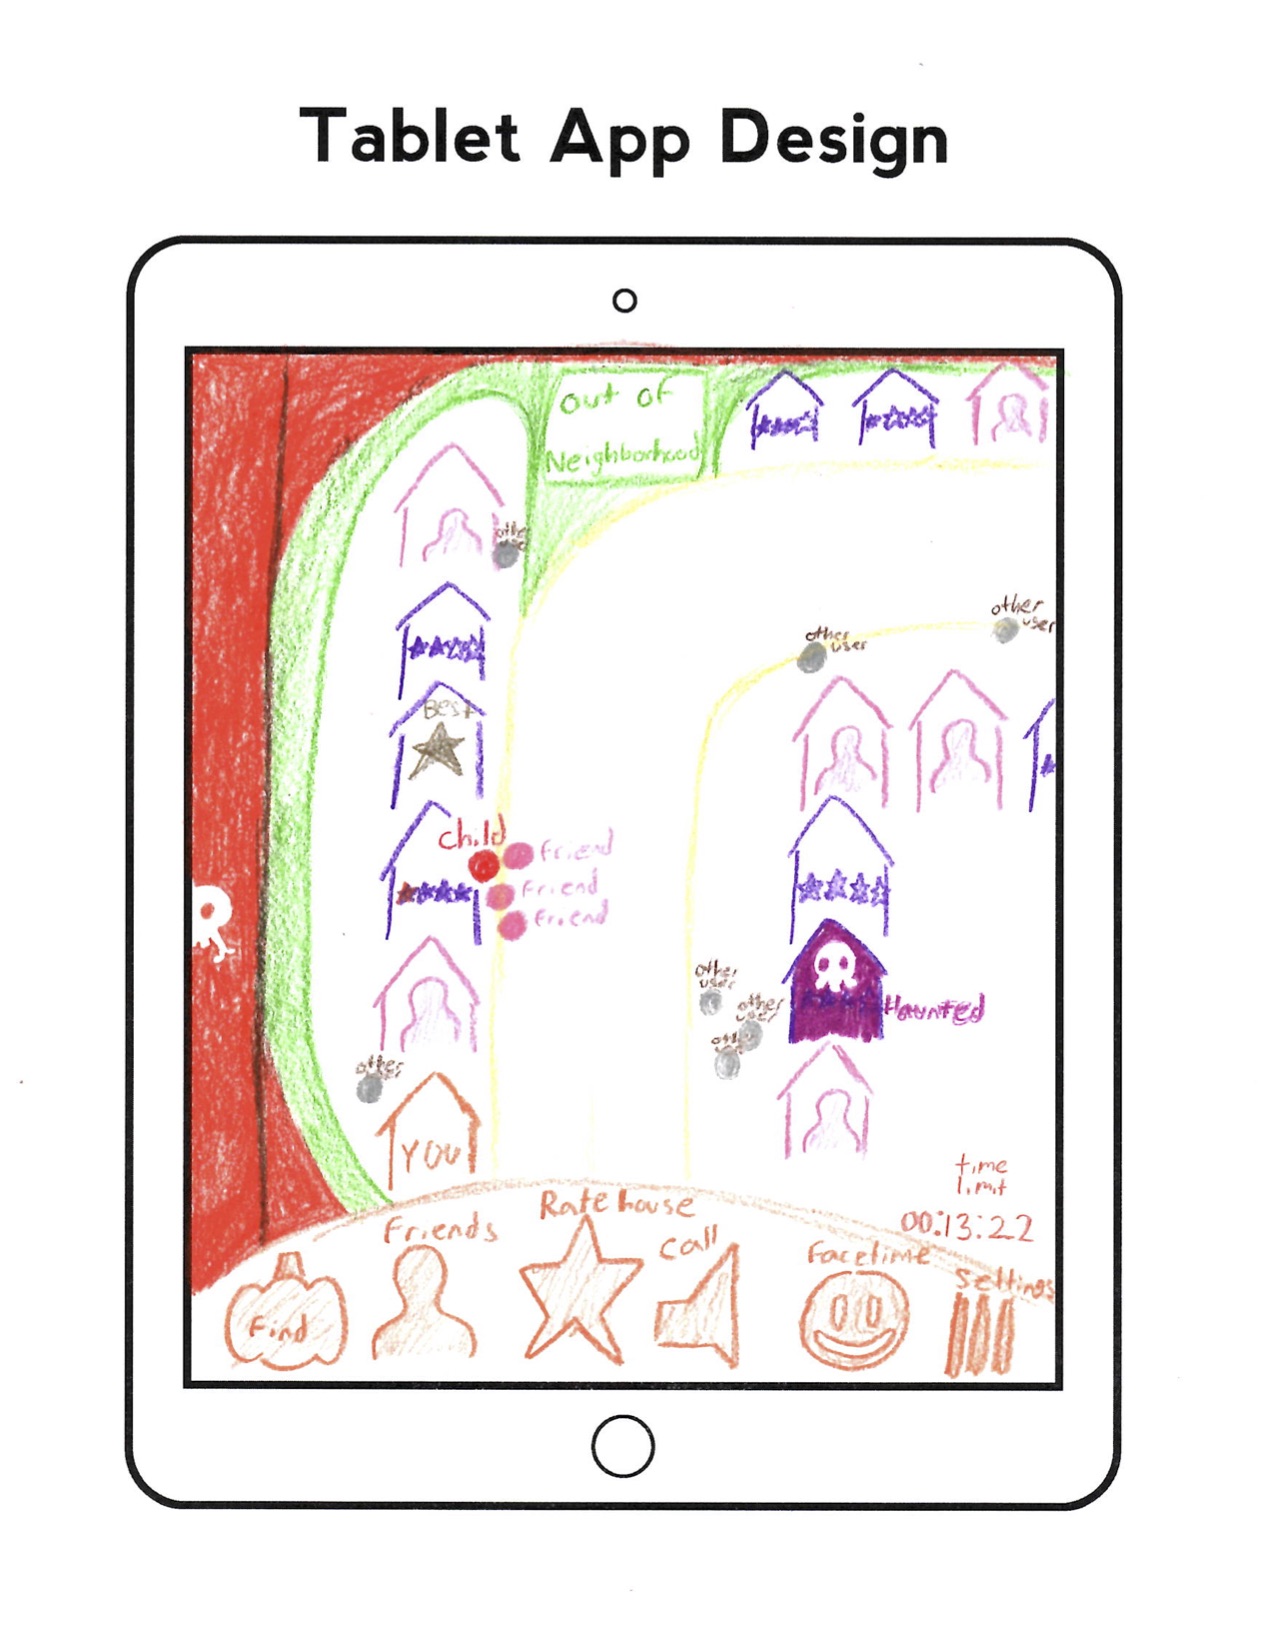 Tablet app design with drawing